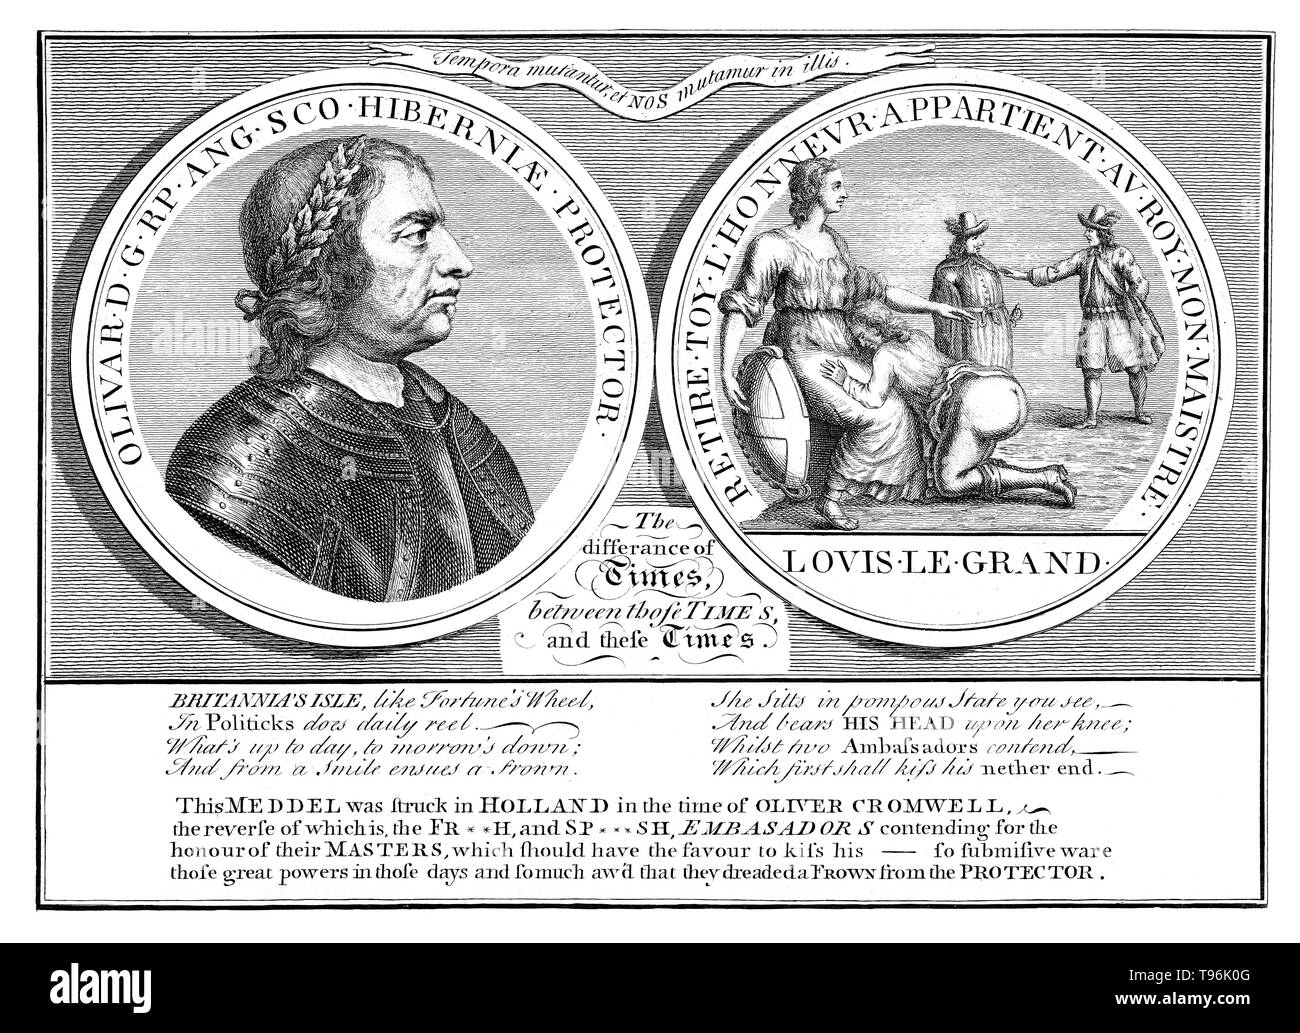 Oliver Cromwell (left) and the Protector kneeling with his head on the lap of Britannia (right): two roundels. Oliver Cromwell (April 25, 1599 - September 3, 1658) was an English military and political leader. He served as Lord Protector of the Commonwealth of England, Scotland, and Ireland from 1653 until his death, acting simultaneously as head of state and head of government of the new republic. Stock Photo